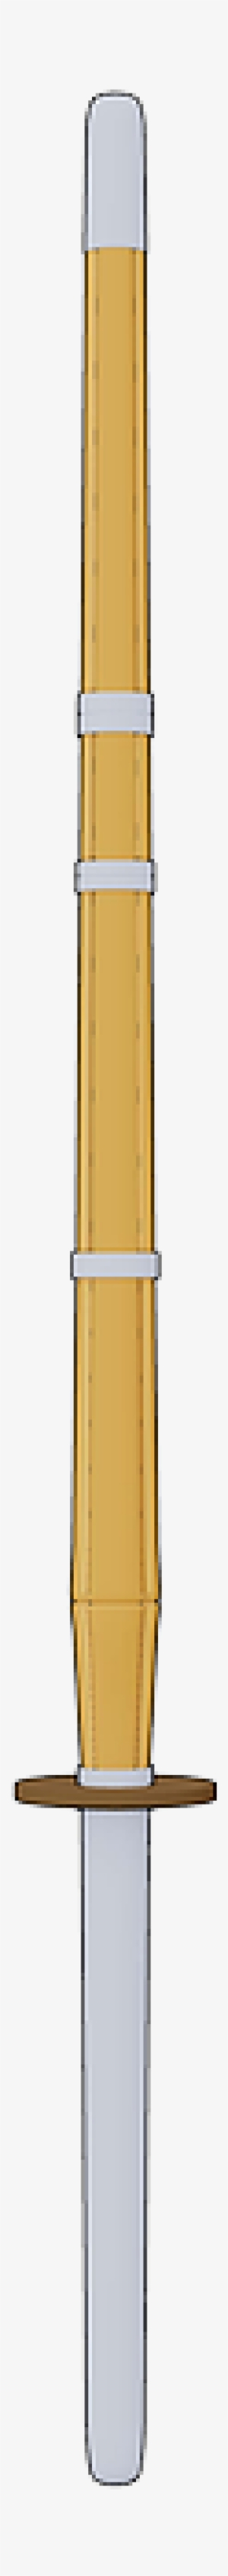 Bamboo Stick Png Free Download - Weapon